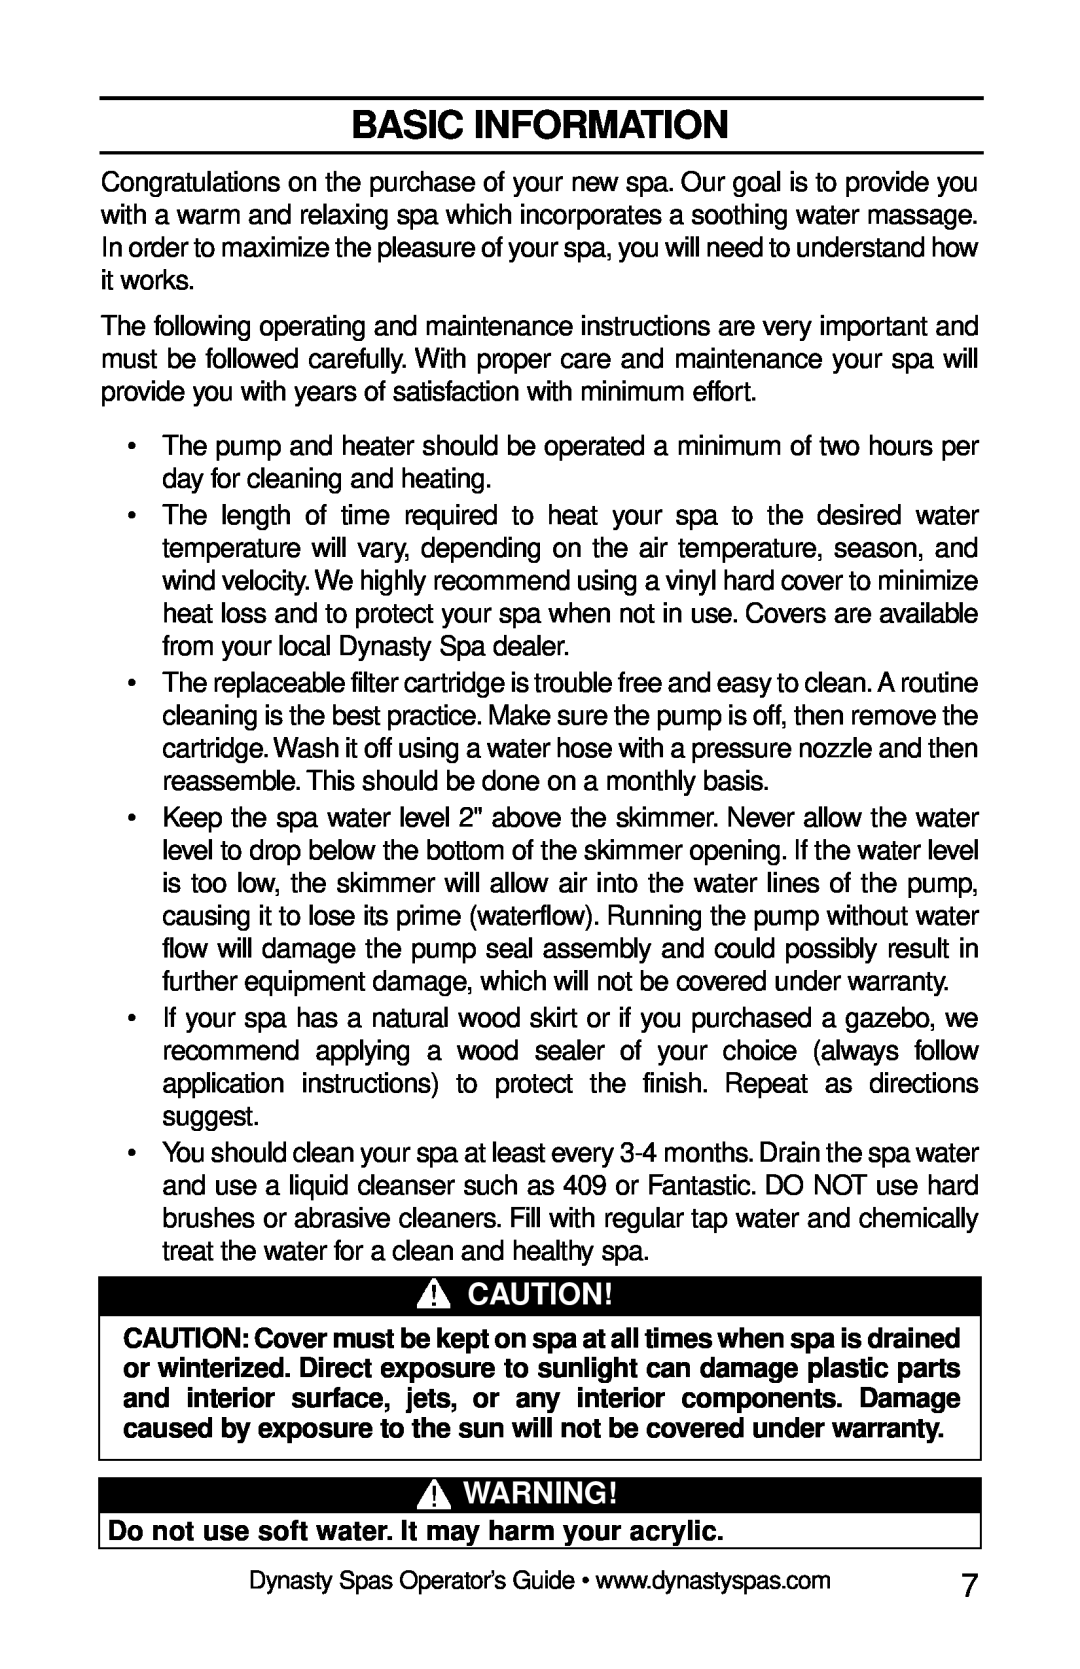 Dynasty Spas 2007 manual Basic Information, Do not use soft water. It may harm your acrylic 